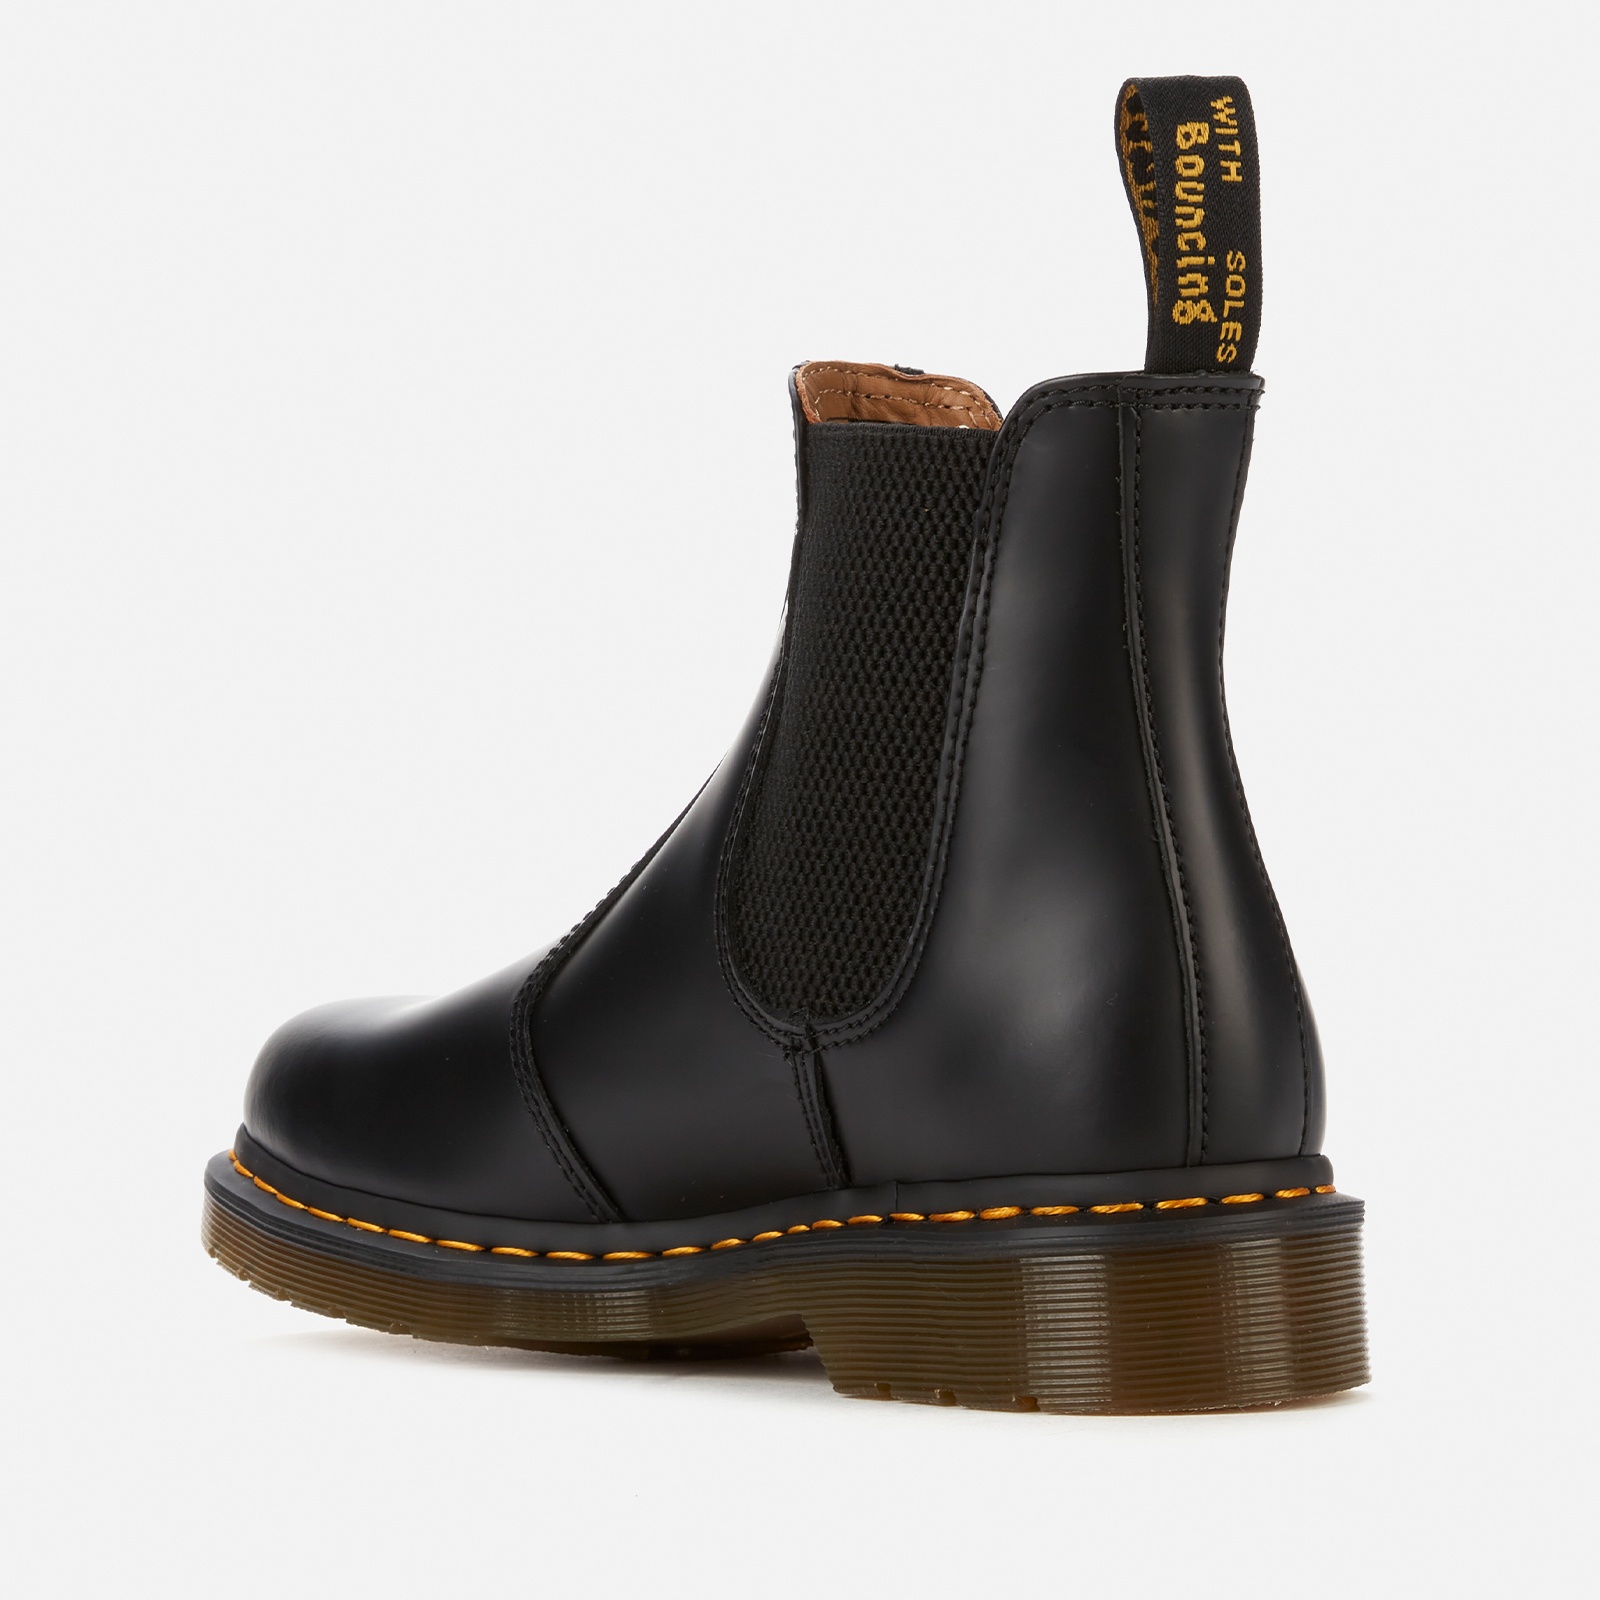 Dr. Martens 2976 Smooth Leather Chelsea Boots - Black - 3